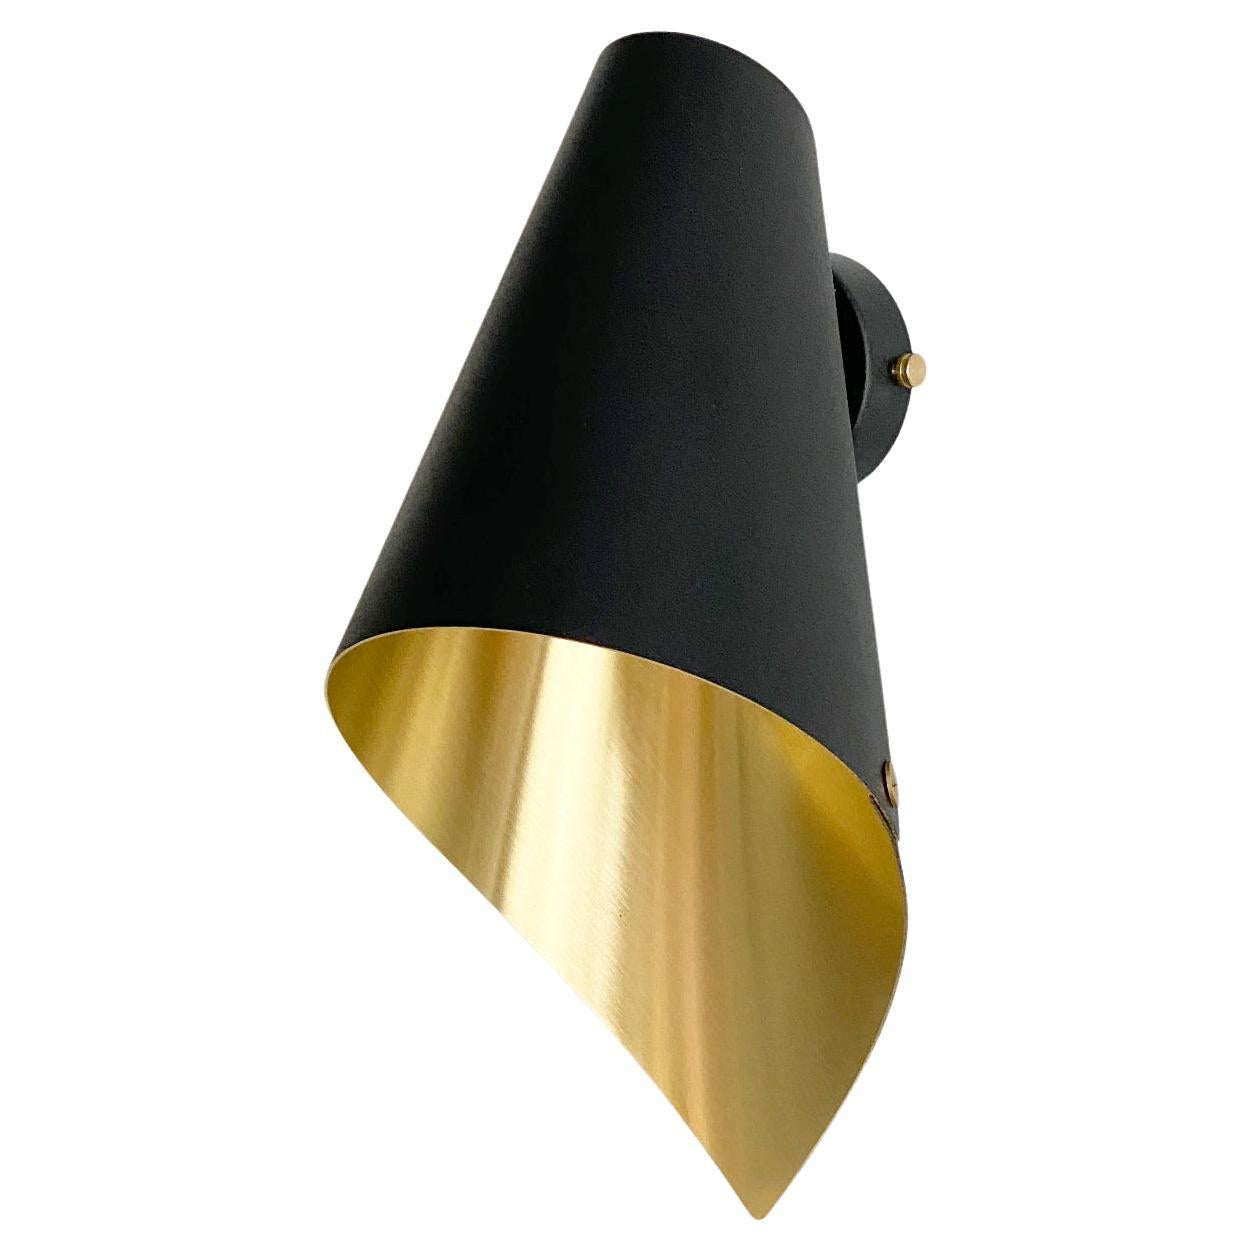 ARC MAXI Asymmetric Wall Light in Black & Brushed Brass Made in Britain For Sale